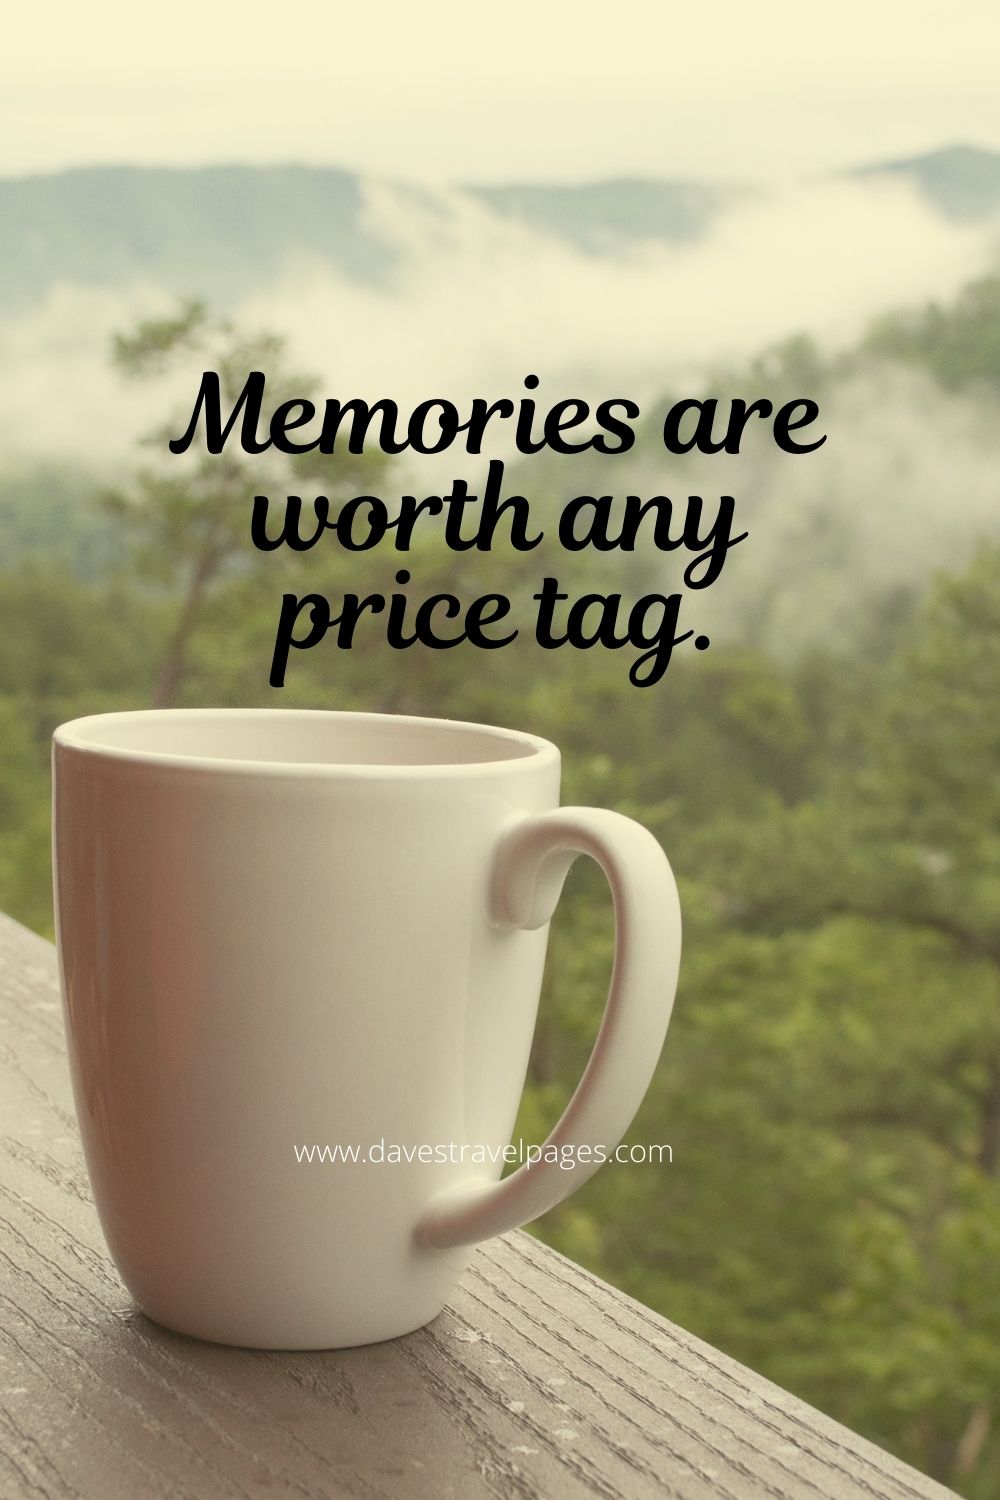 Memories are worth any price tage vacation instagram caption